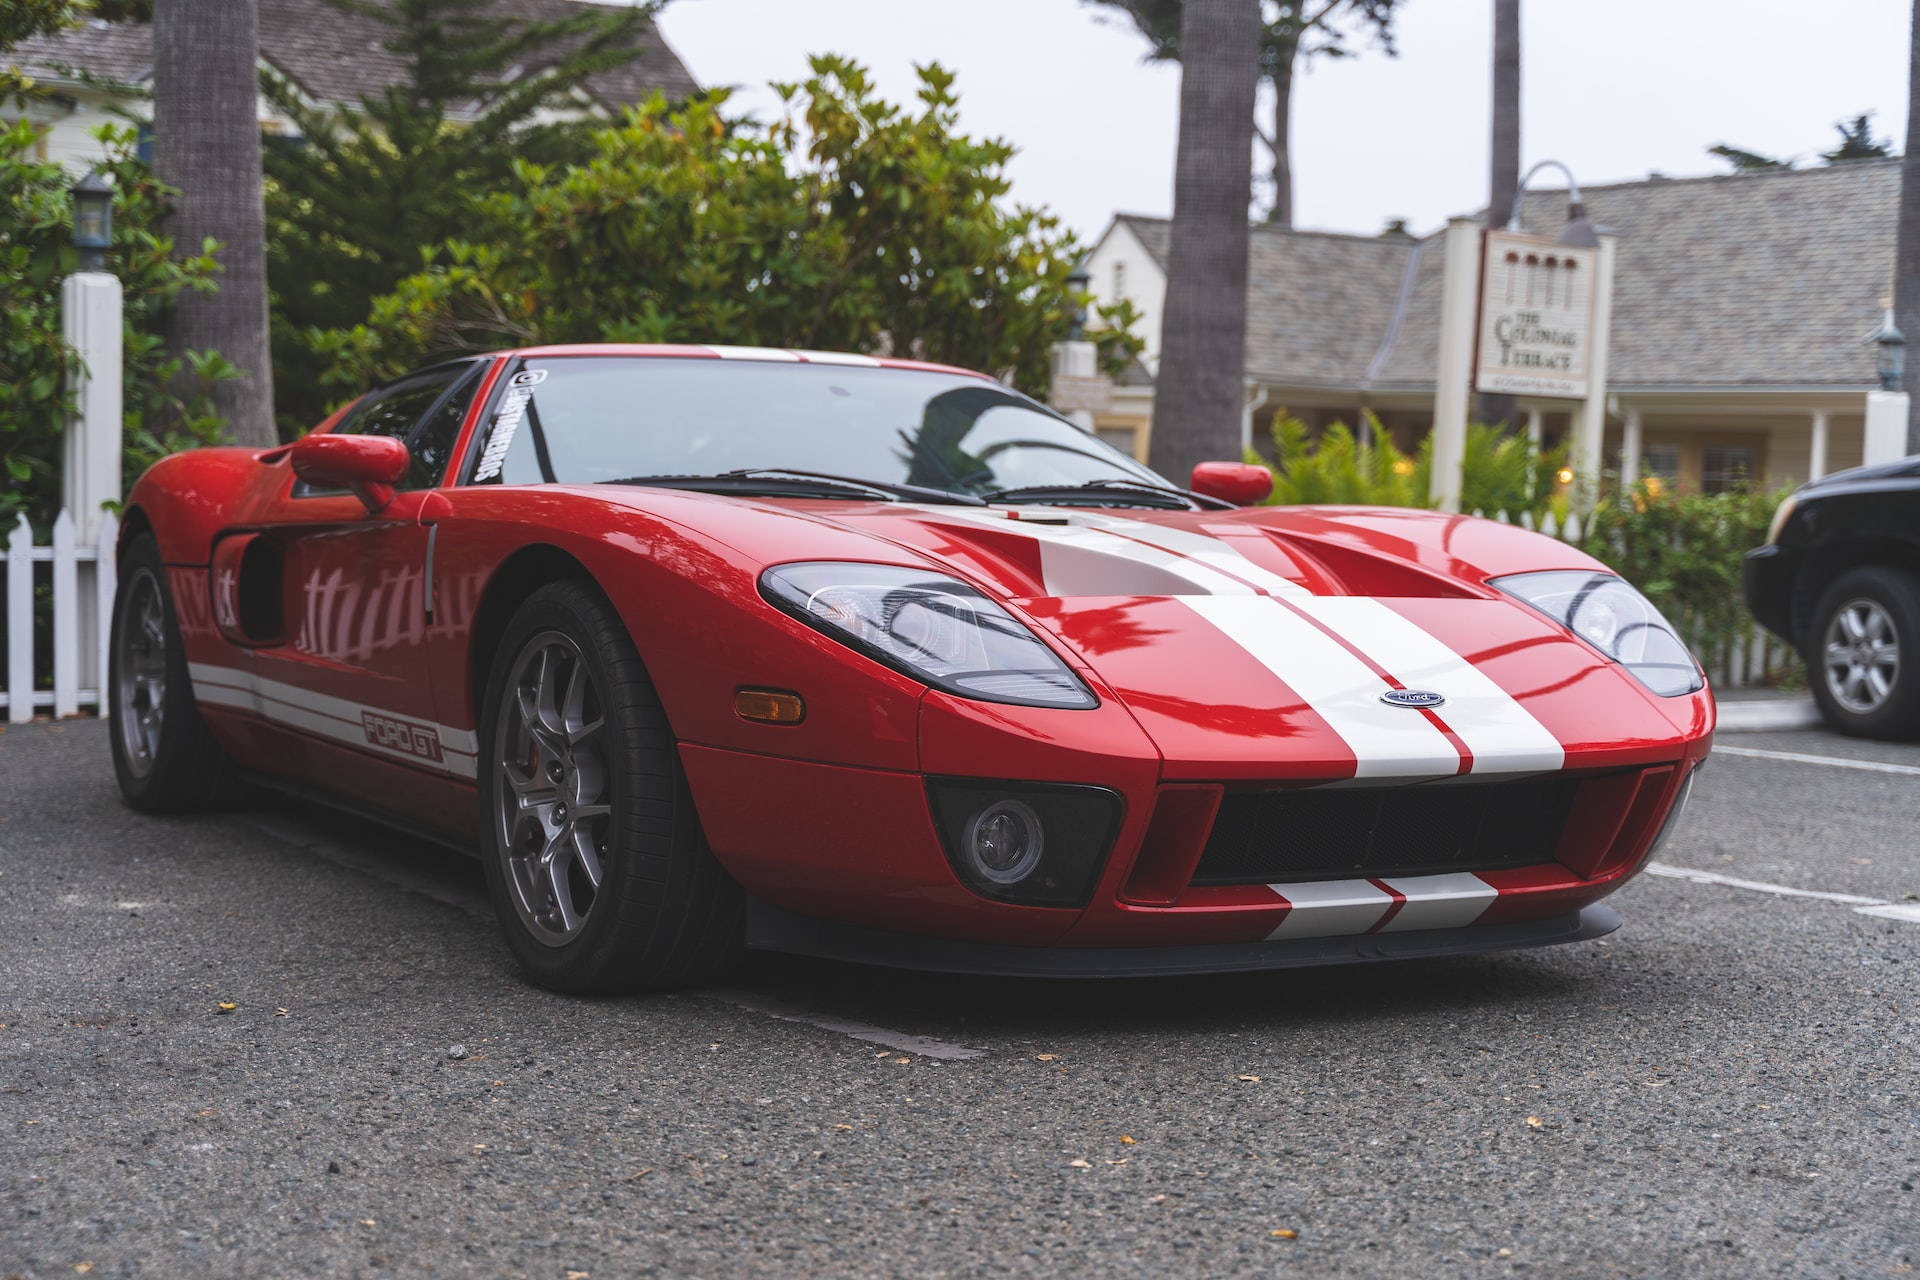 Scarlet-colored Ford Gt Background